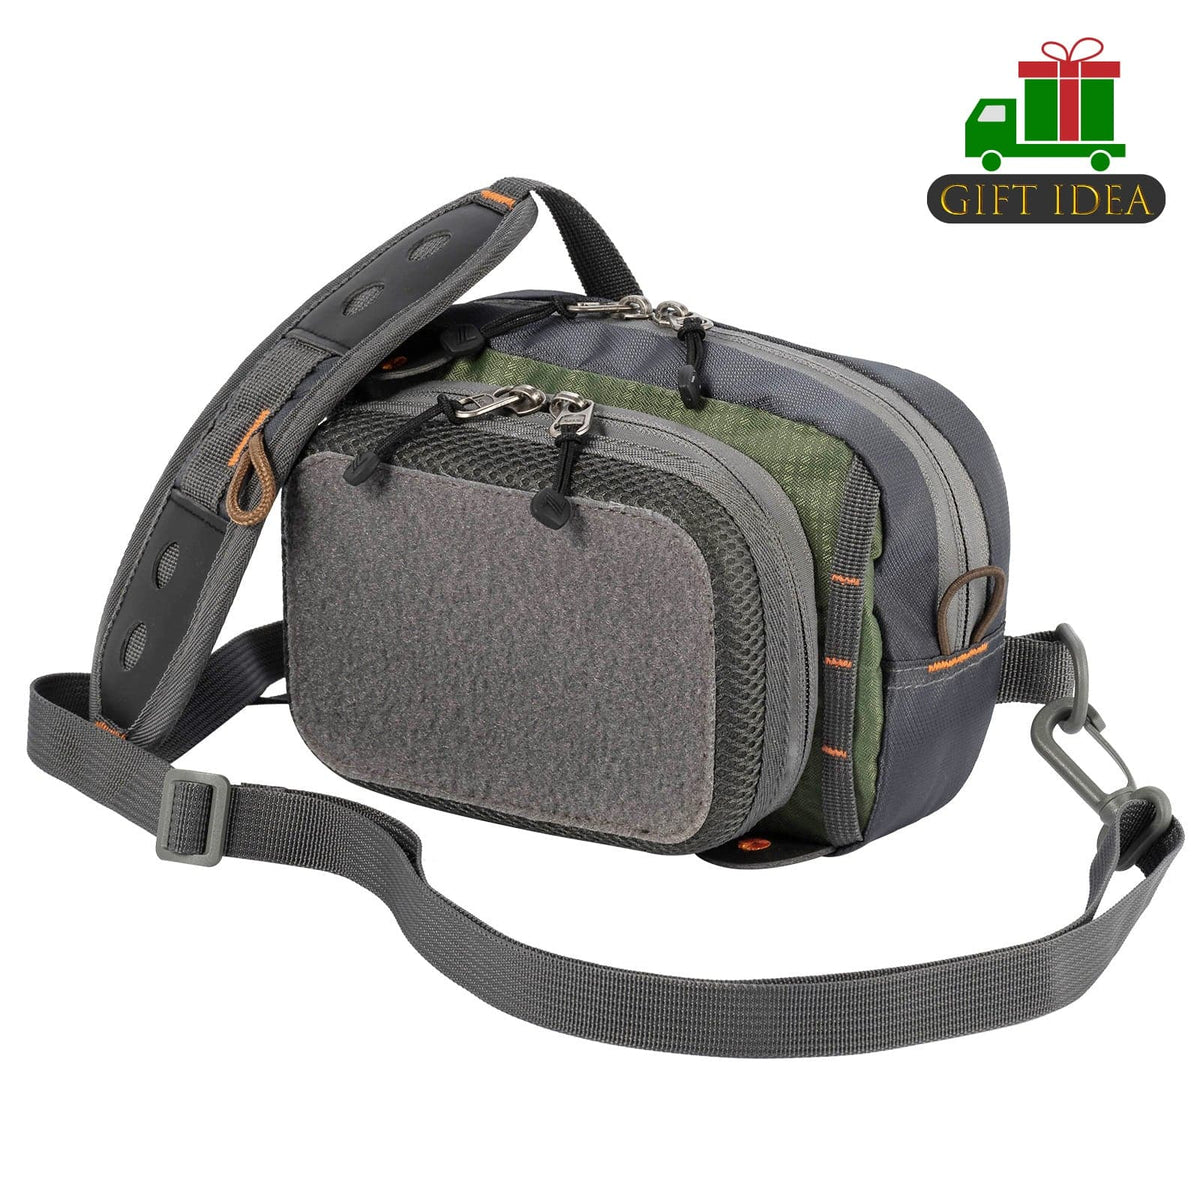 Fly Fishing Chest Pack, Fly Fishing Waist Pack - Lightweight Army